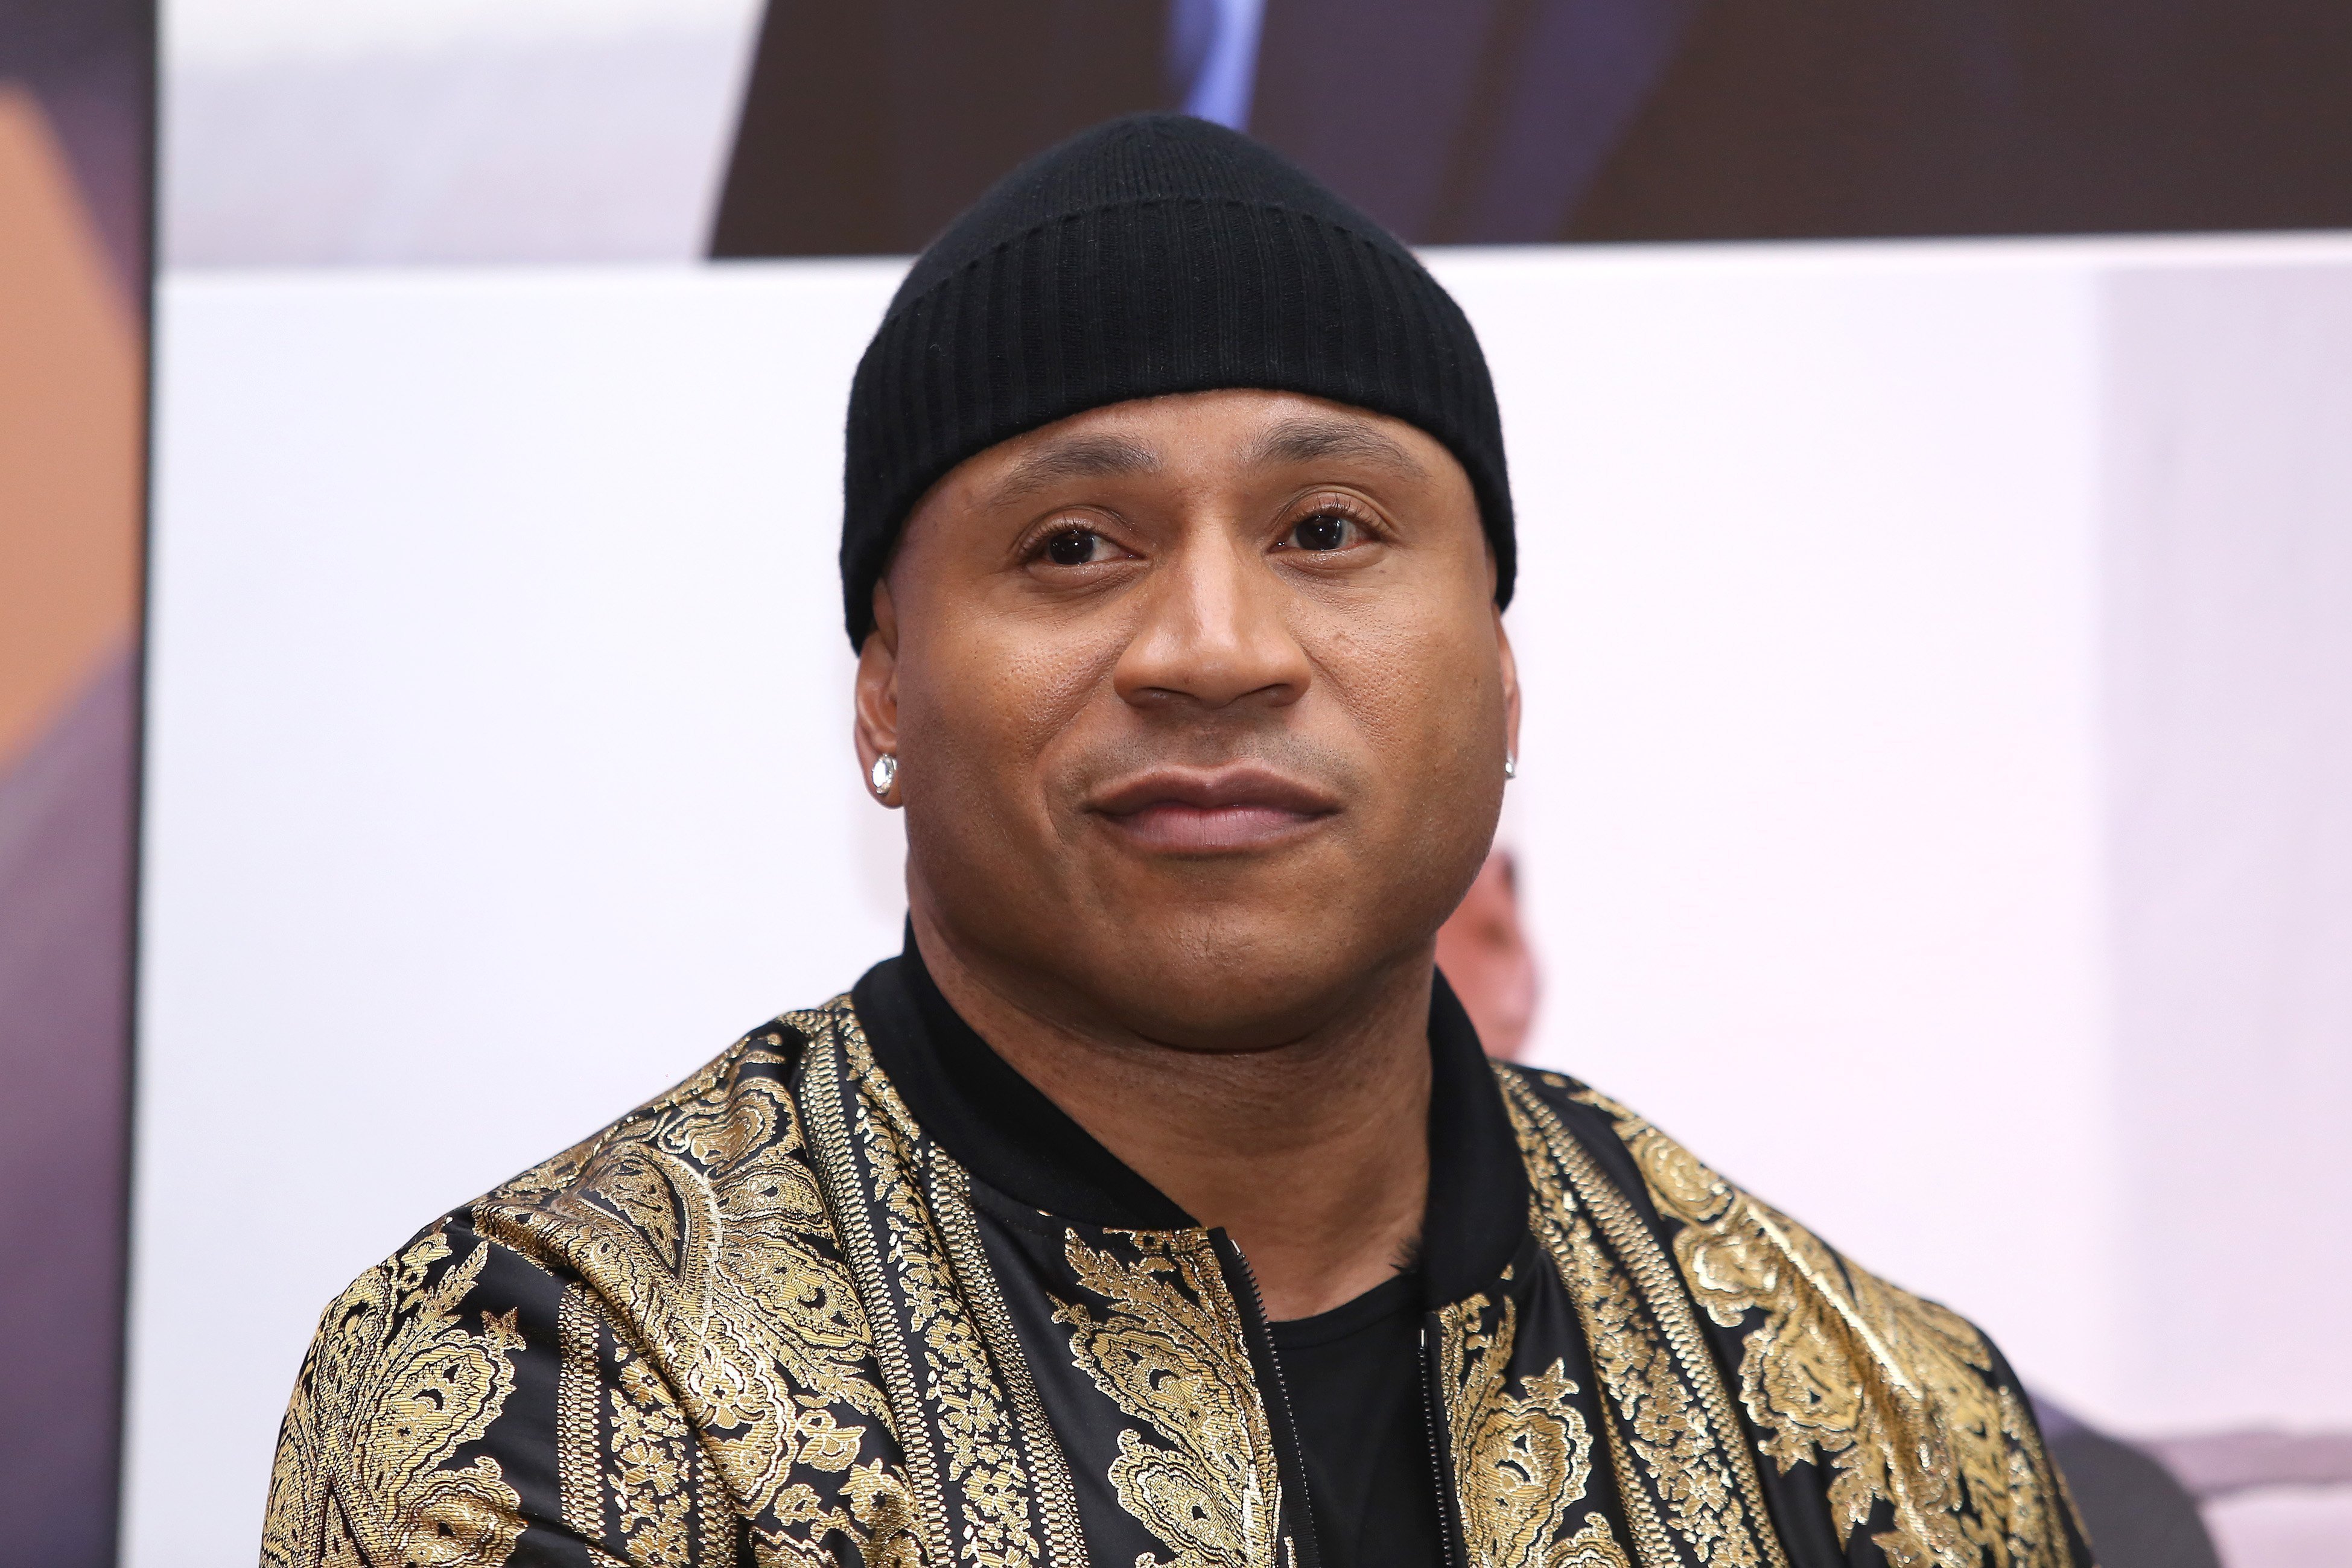 LL Cool J during a press conference at Hotel St. Regis on June 5, 2019 in Mexico City, Mexico | Source: Getty Images